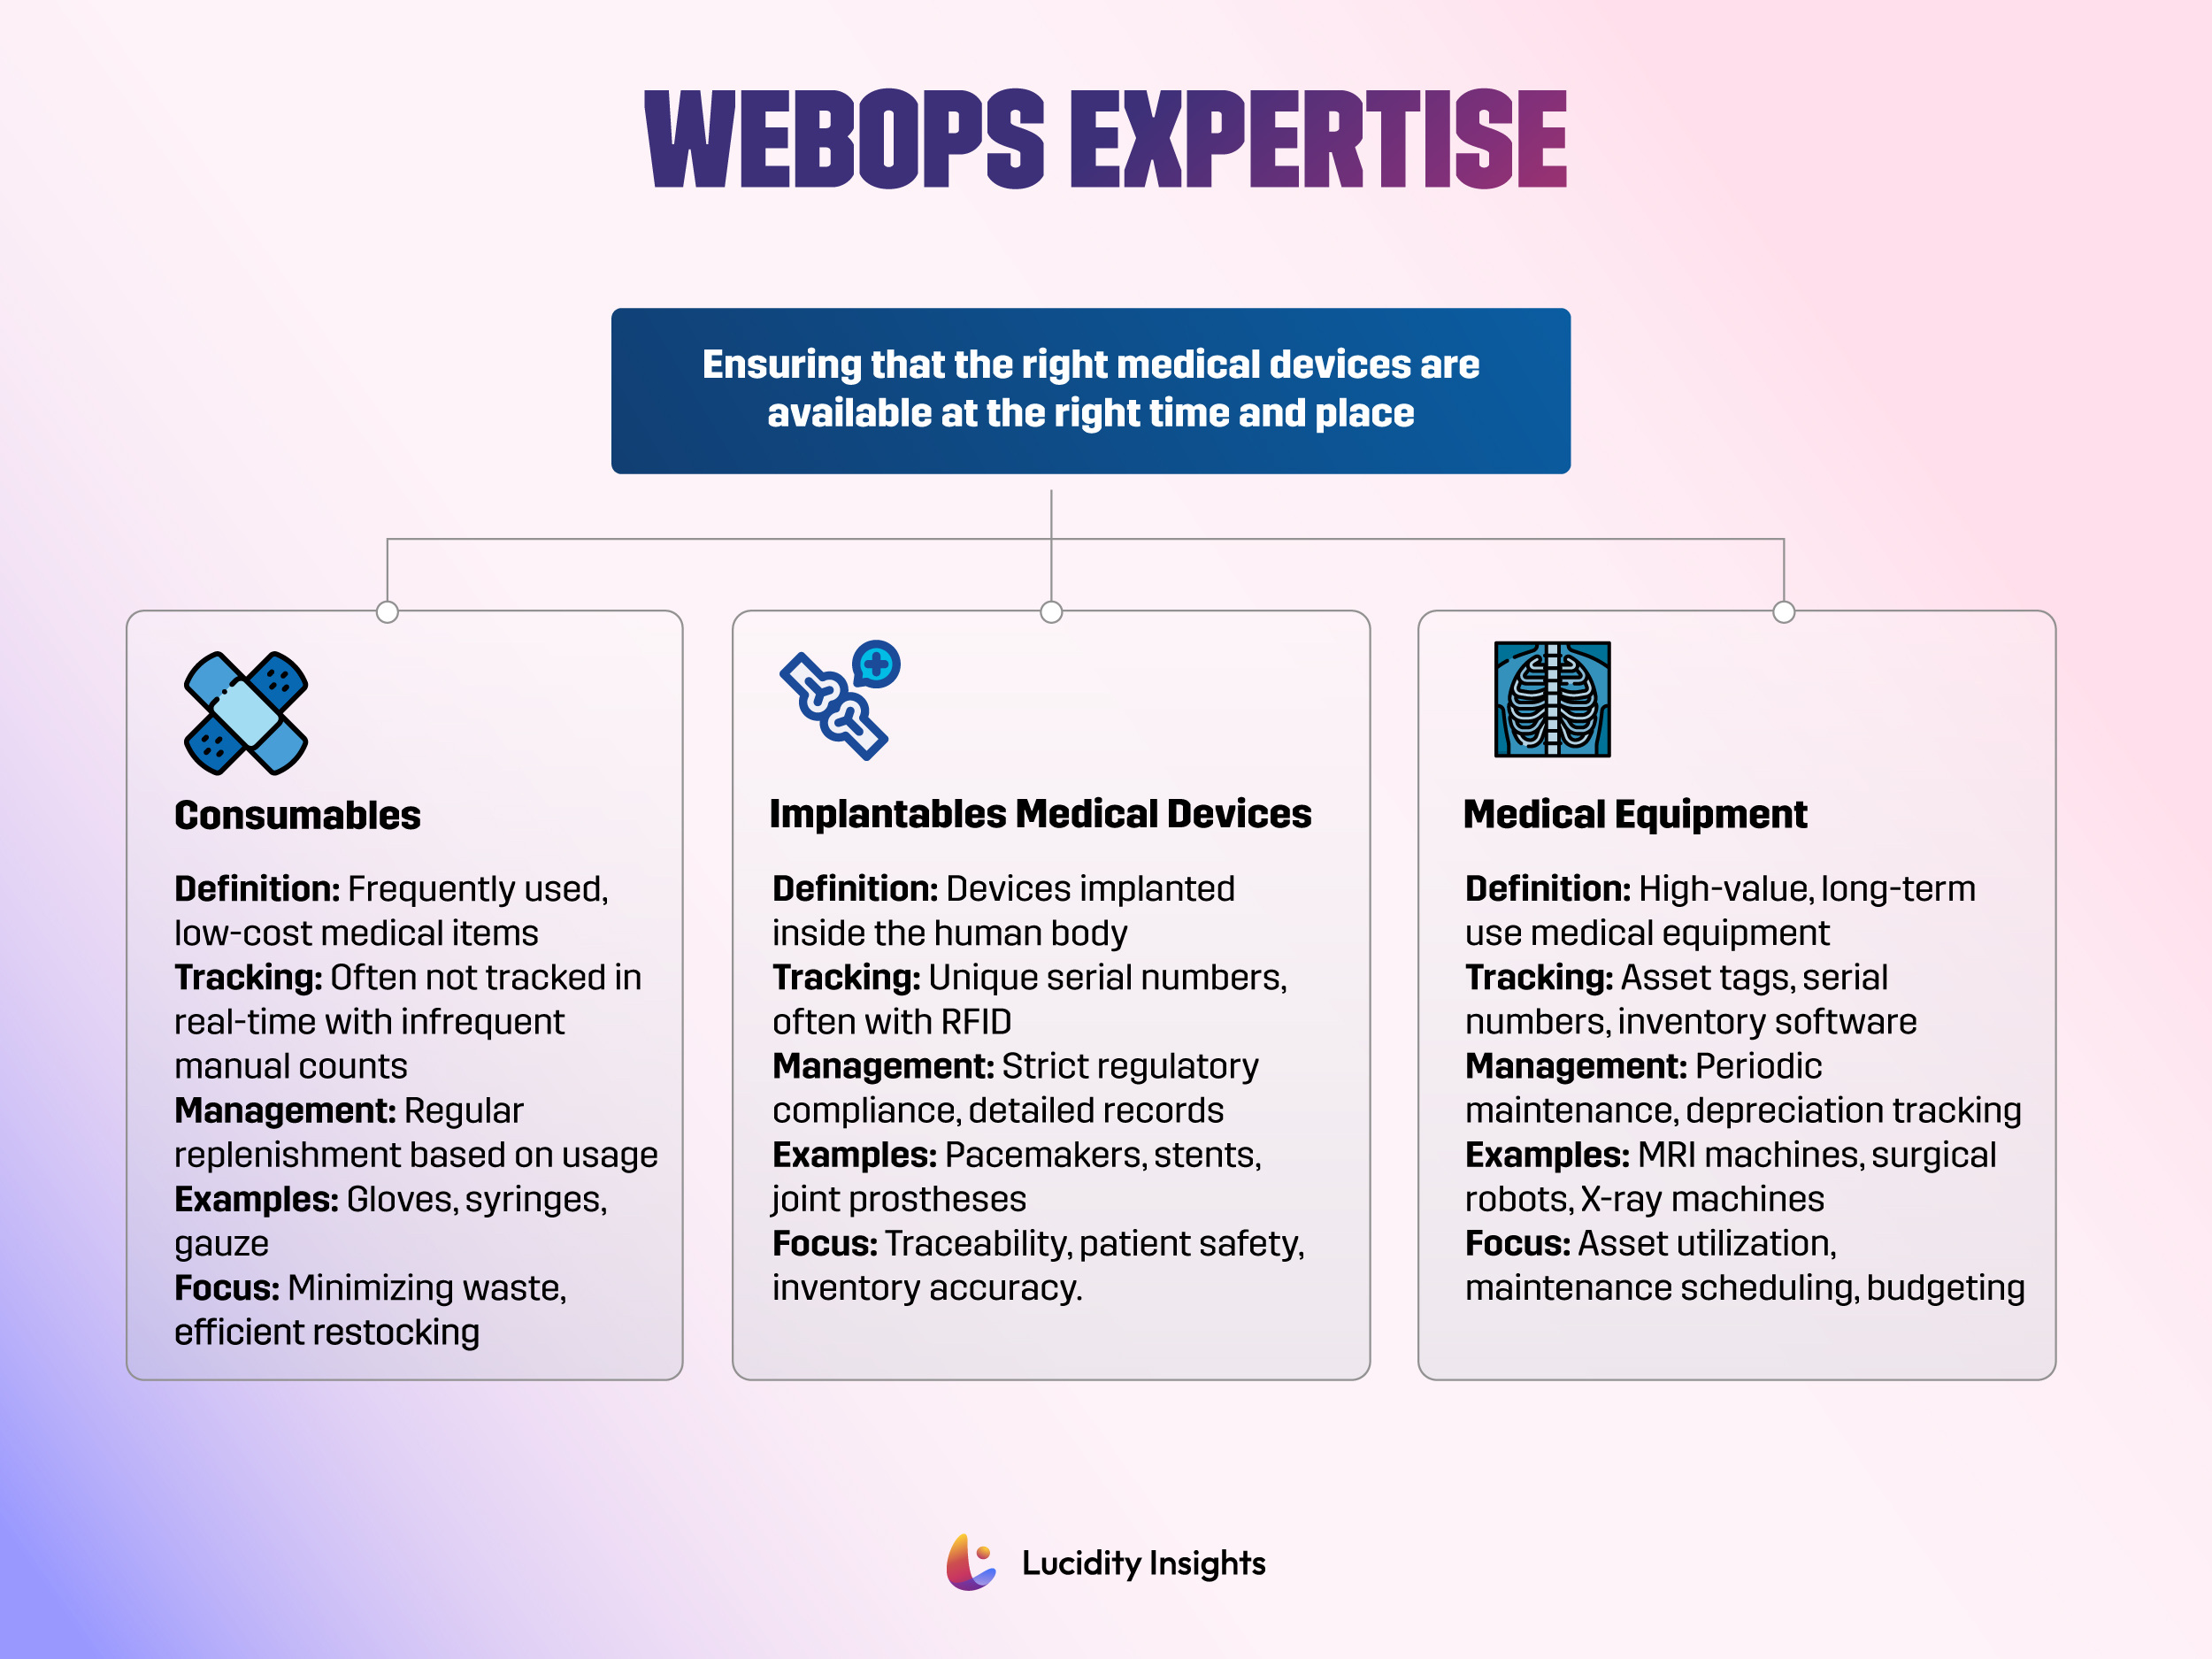 WebOps’ Expertise Is on Implantable Medical Devices, Including Both Biologic and Non-biologics